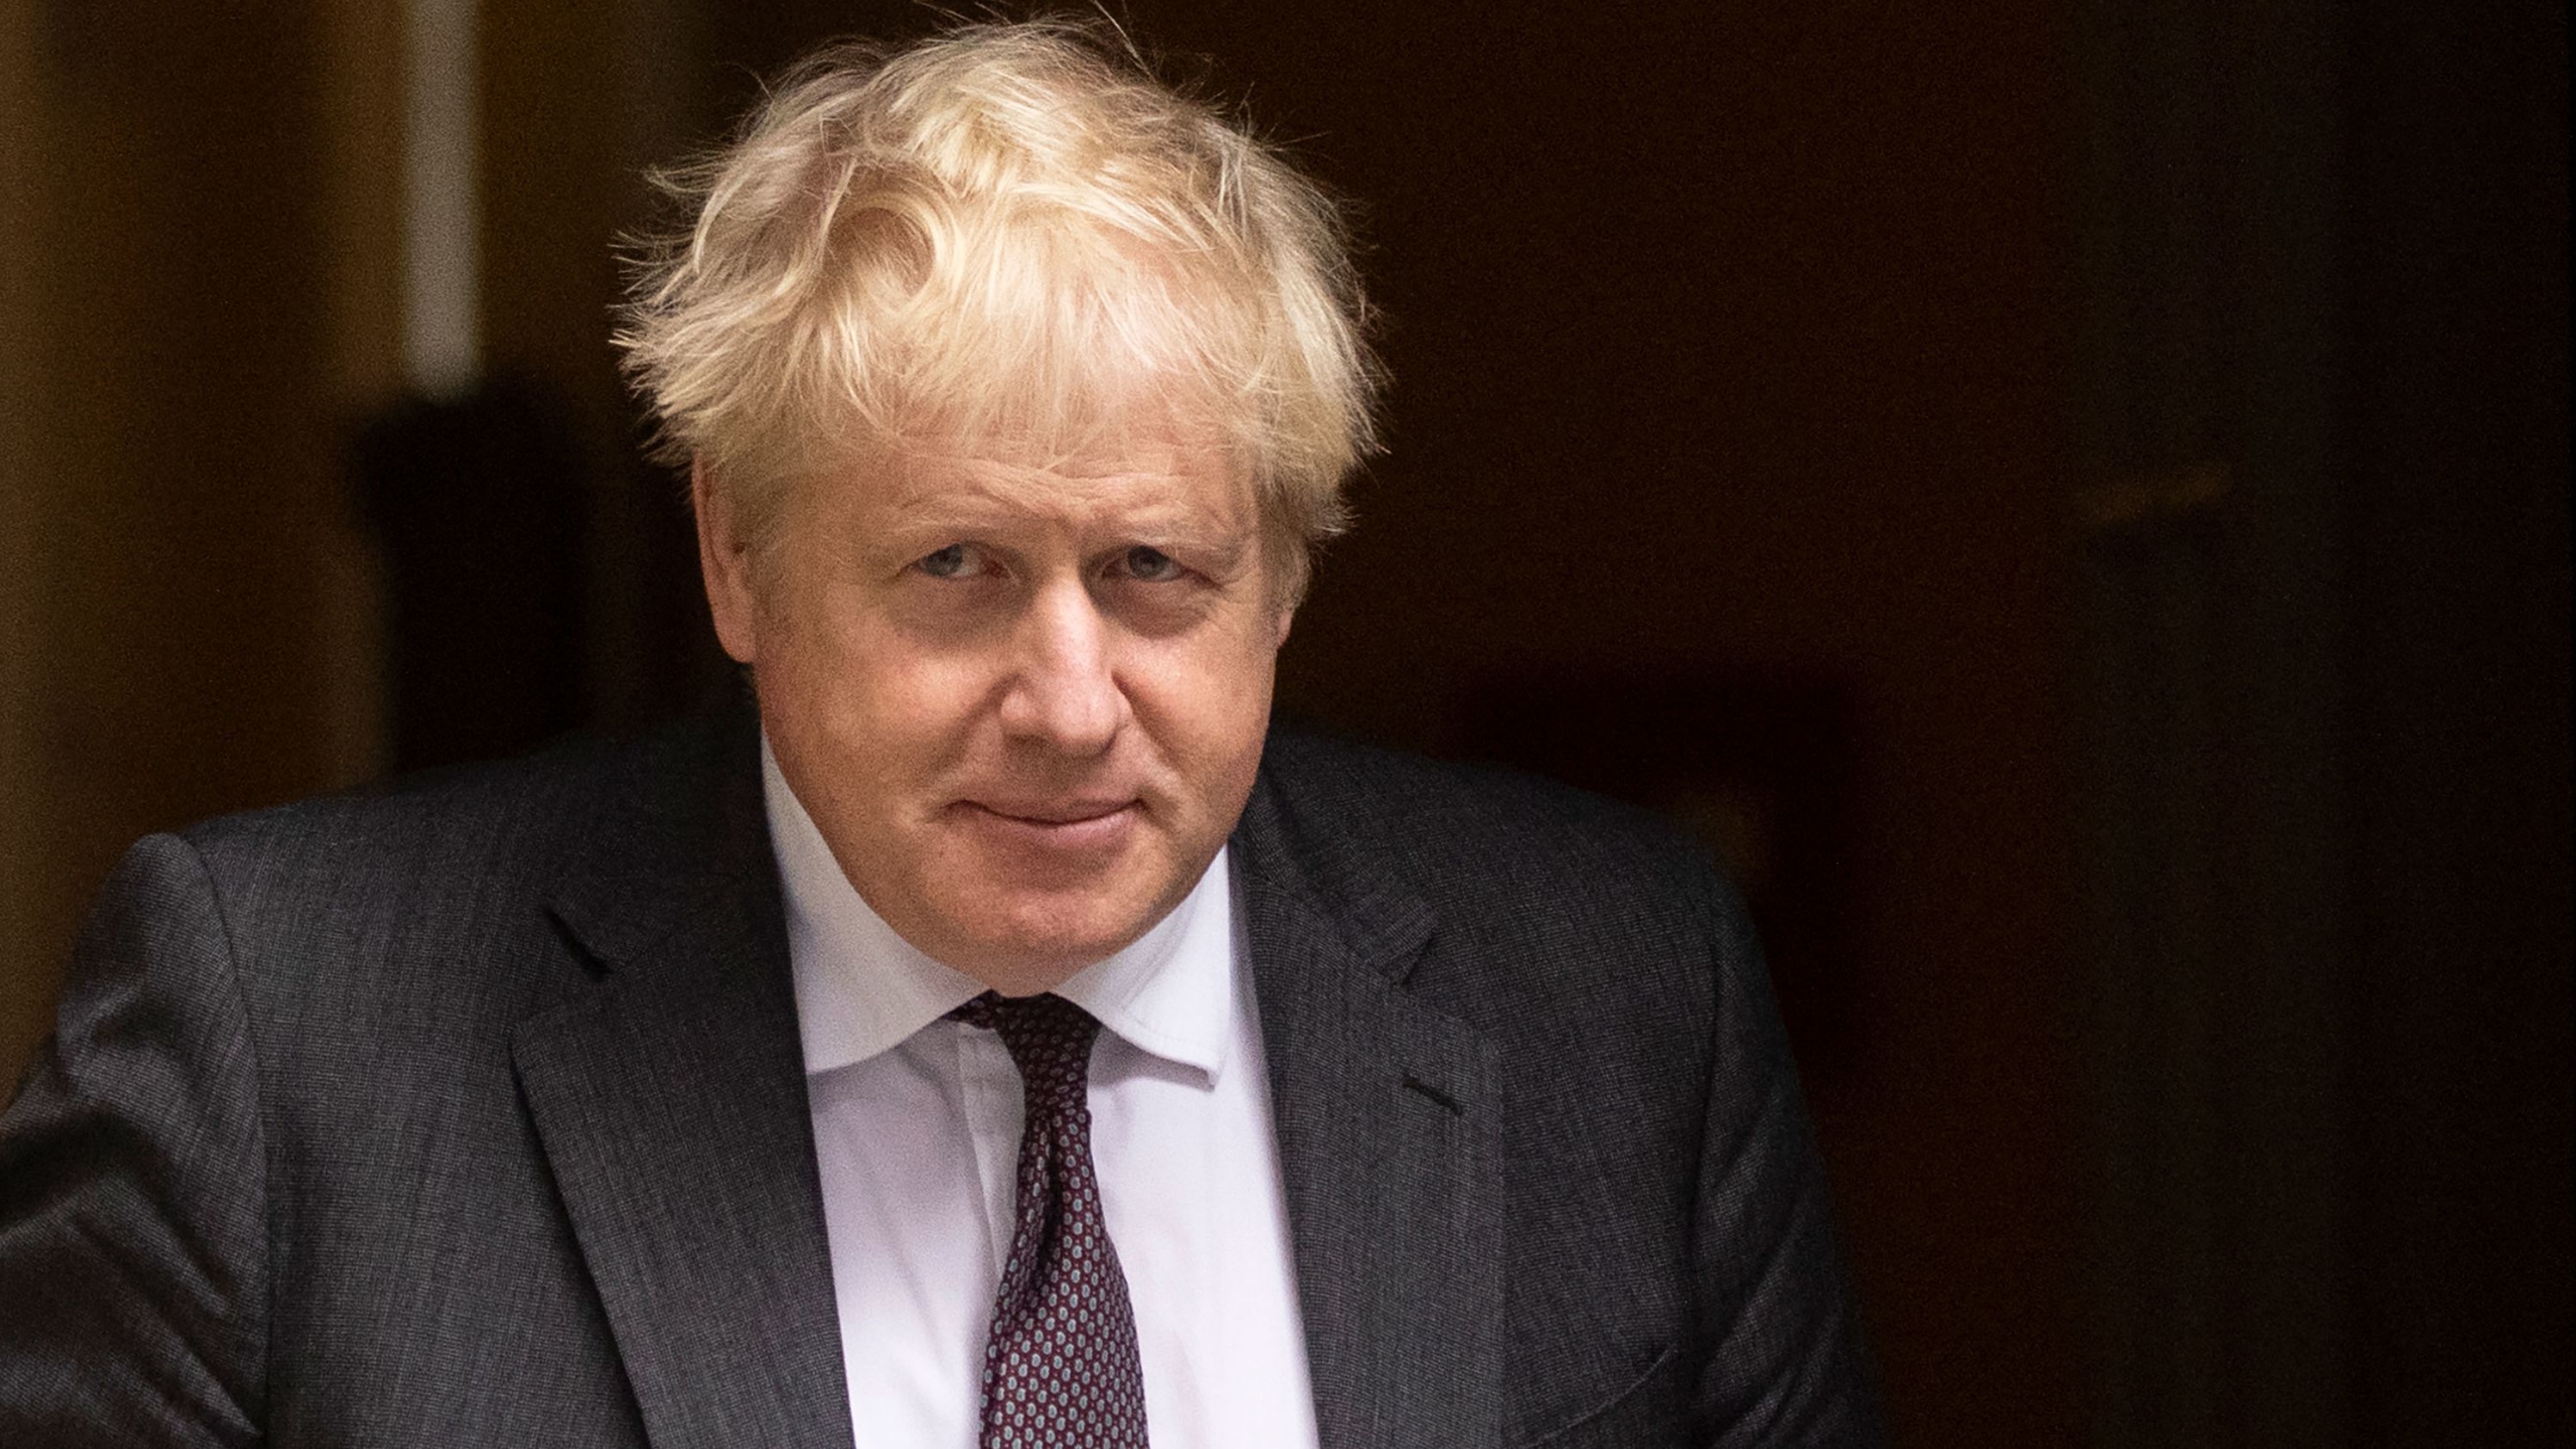 Boris Johnson said the UK could reach net zero without having to "sacrifice the things we love."